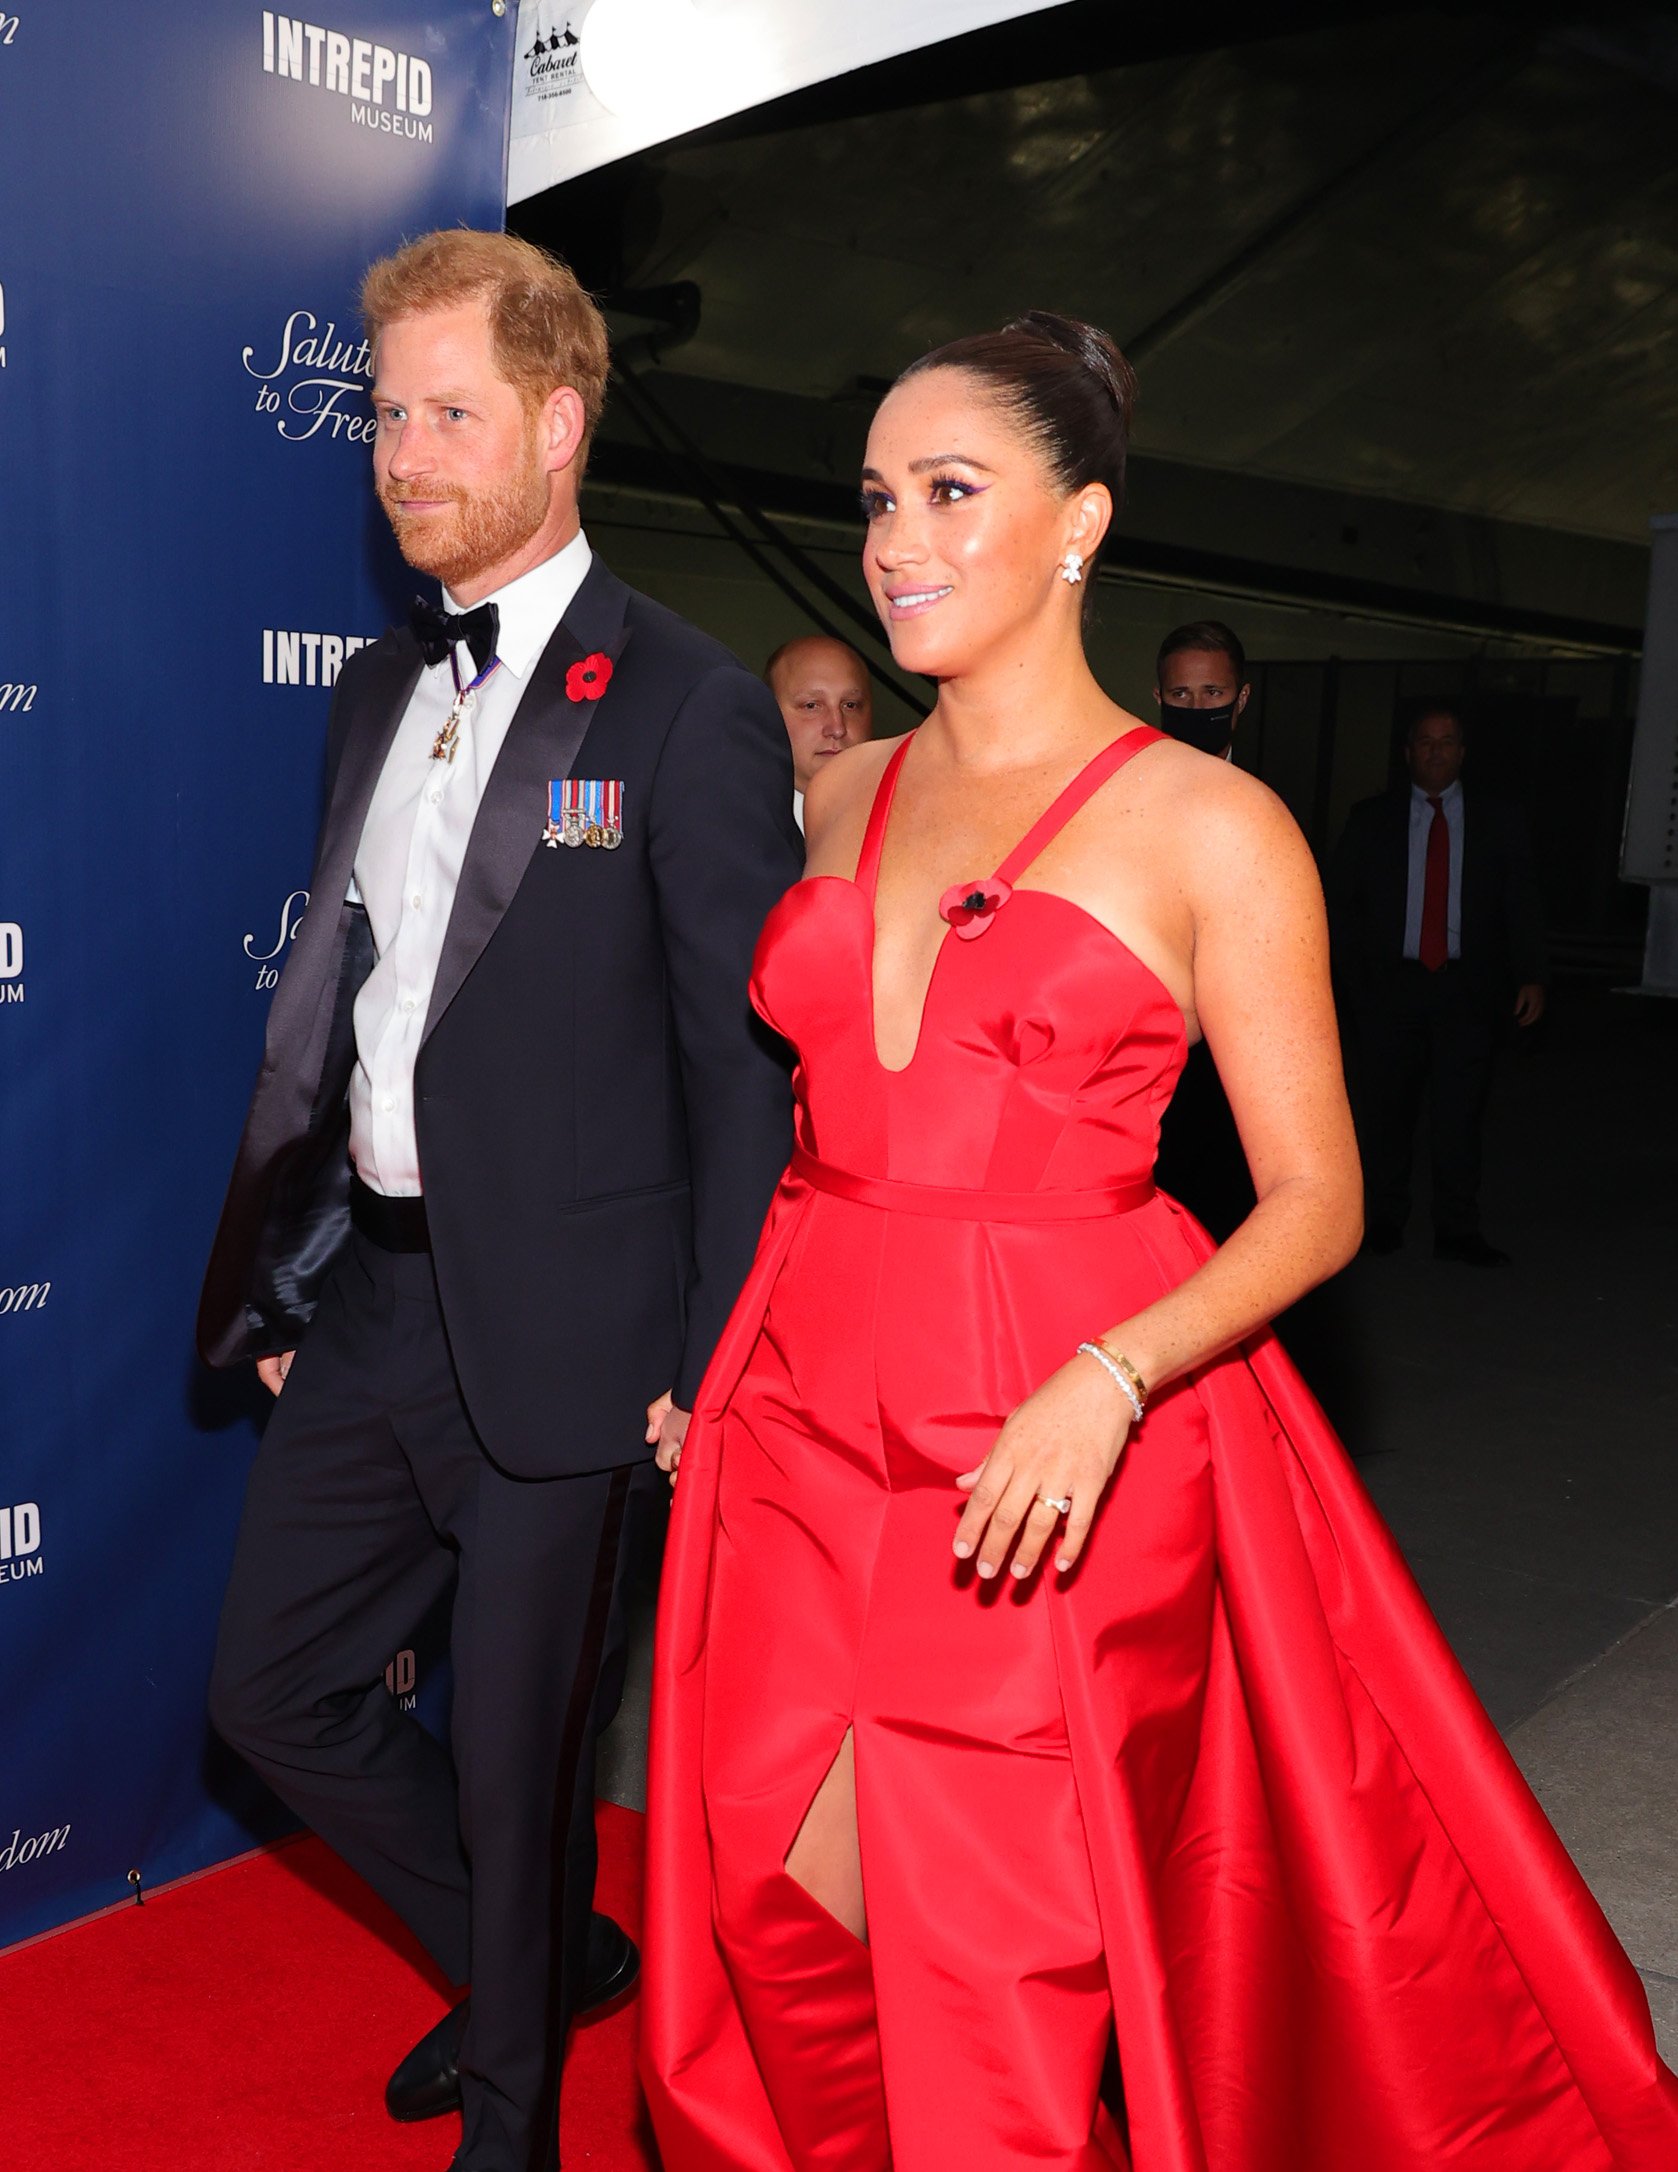 Prince Harry and Duchess Meghan at the Intrepid Museum for the Annual Salute To Freedom Gala on November 10, 2021, in New York City. | Source: Theo Wargo/Getty Images